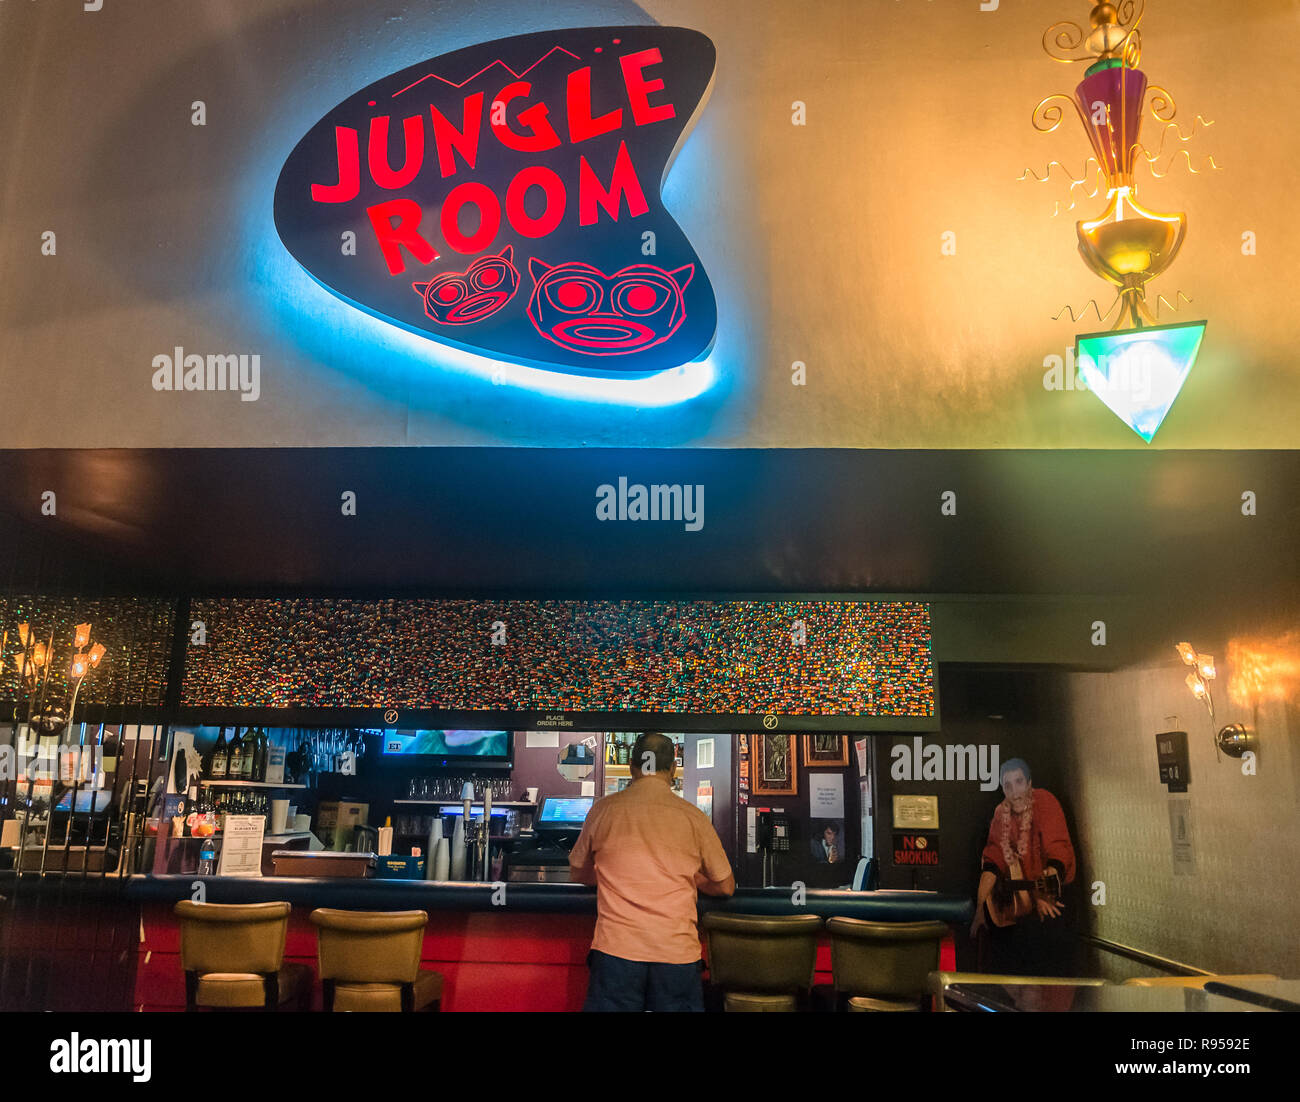 A customer waits for his order in the Hungle Room at Elvis Presley’s Heartbreak Hotel on Elvis Presley Boulevard in Memphis, Tennessee, Sept. 4, 2015. Stock Photo